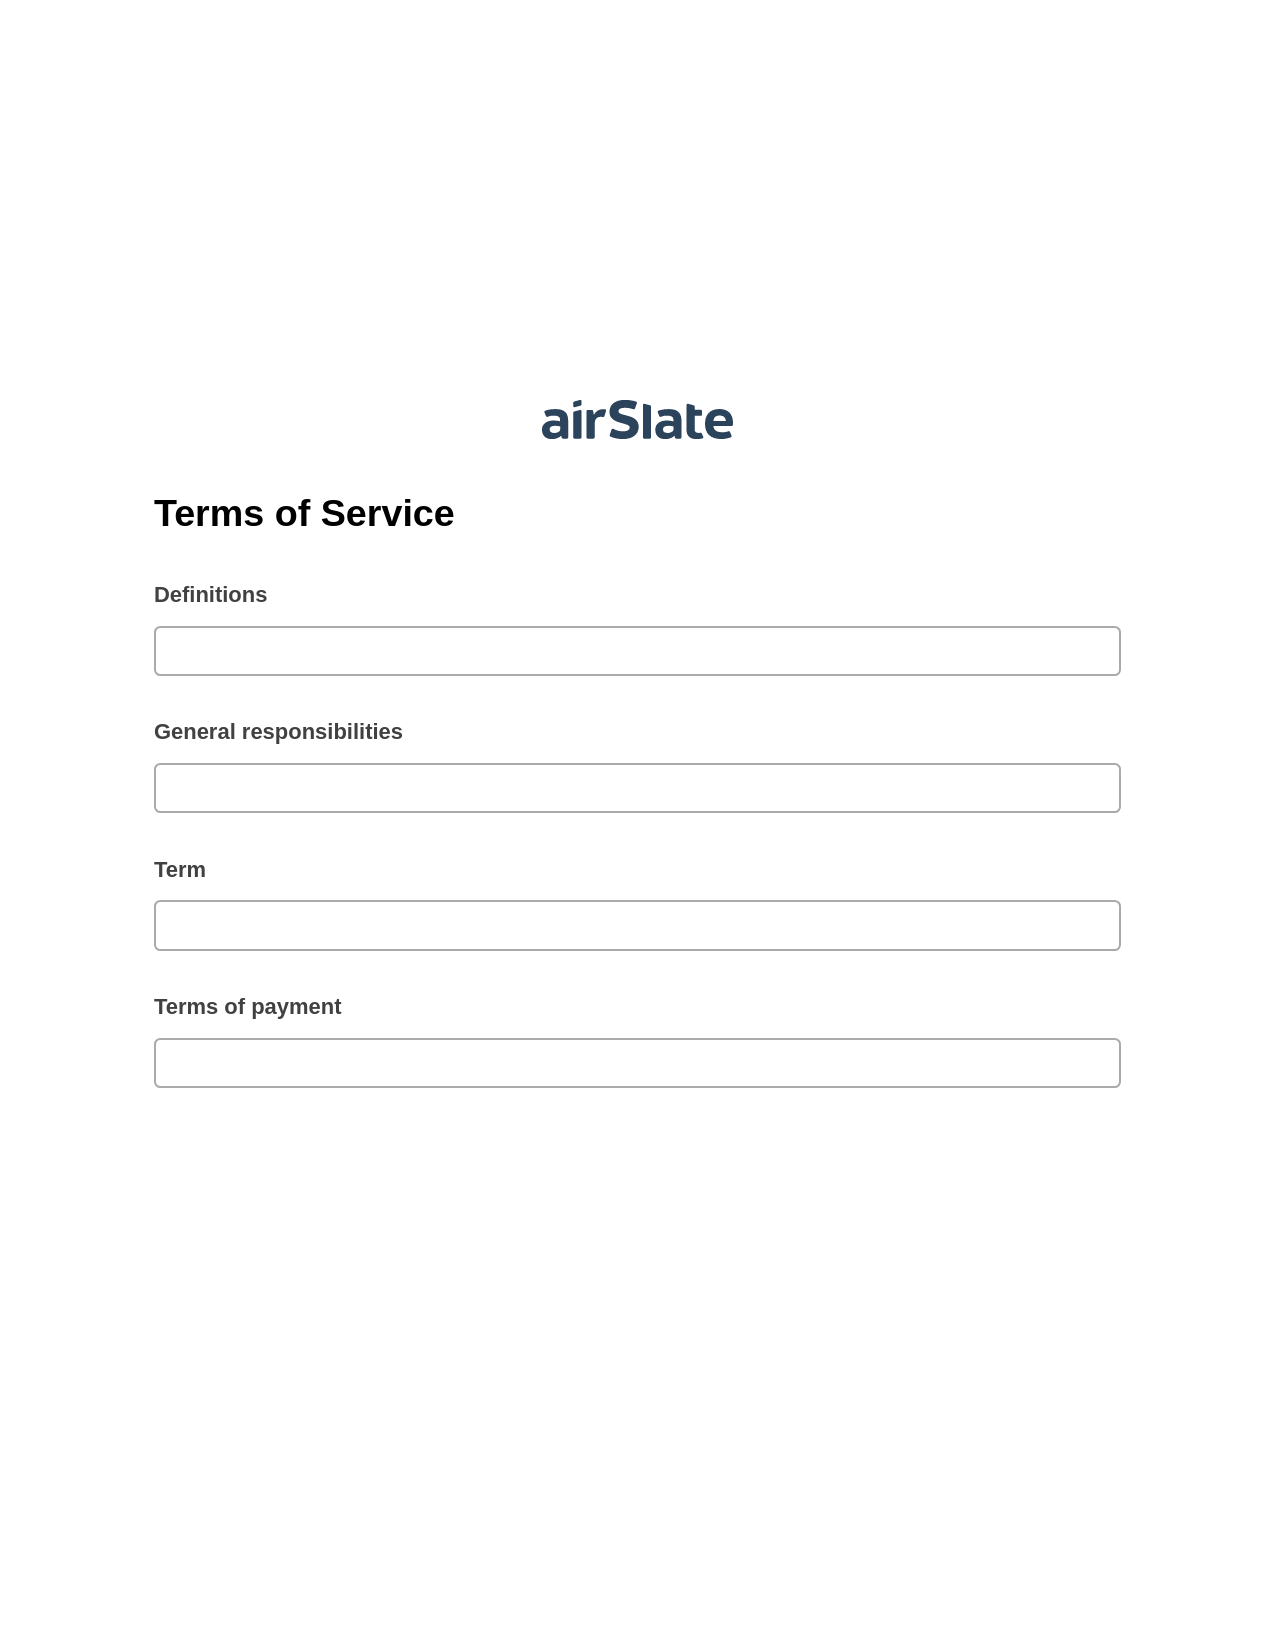 Terms of Service Pre-fill from Salesforce Records with SOQL Bot, Invoke Salesforce Process Bot, Archive to SharePoint Folder Bot